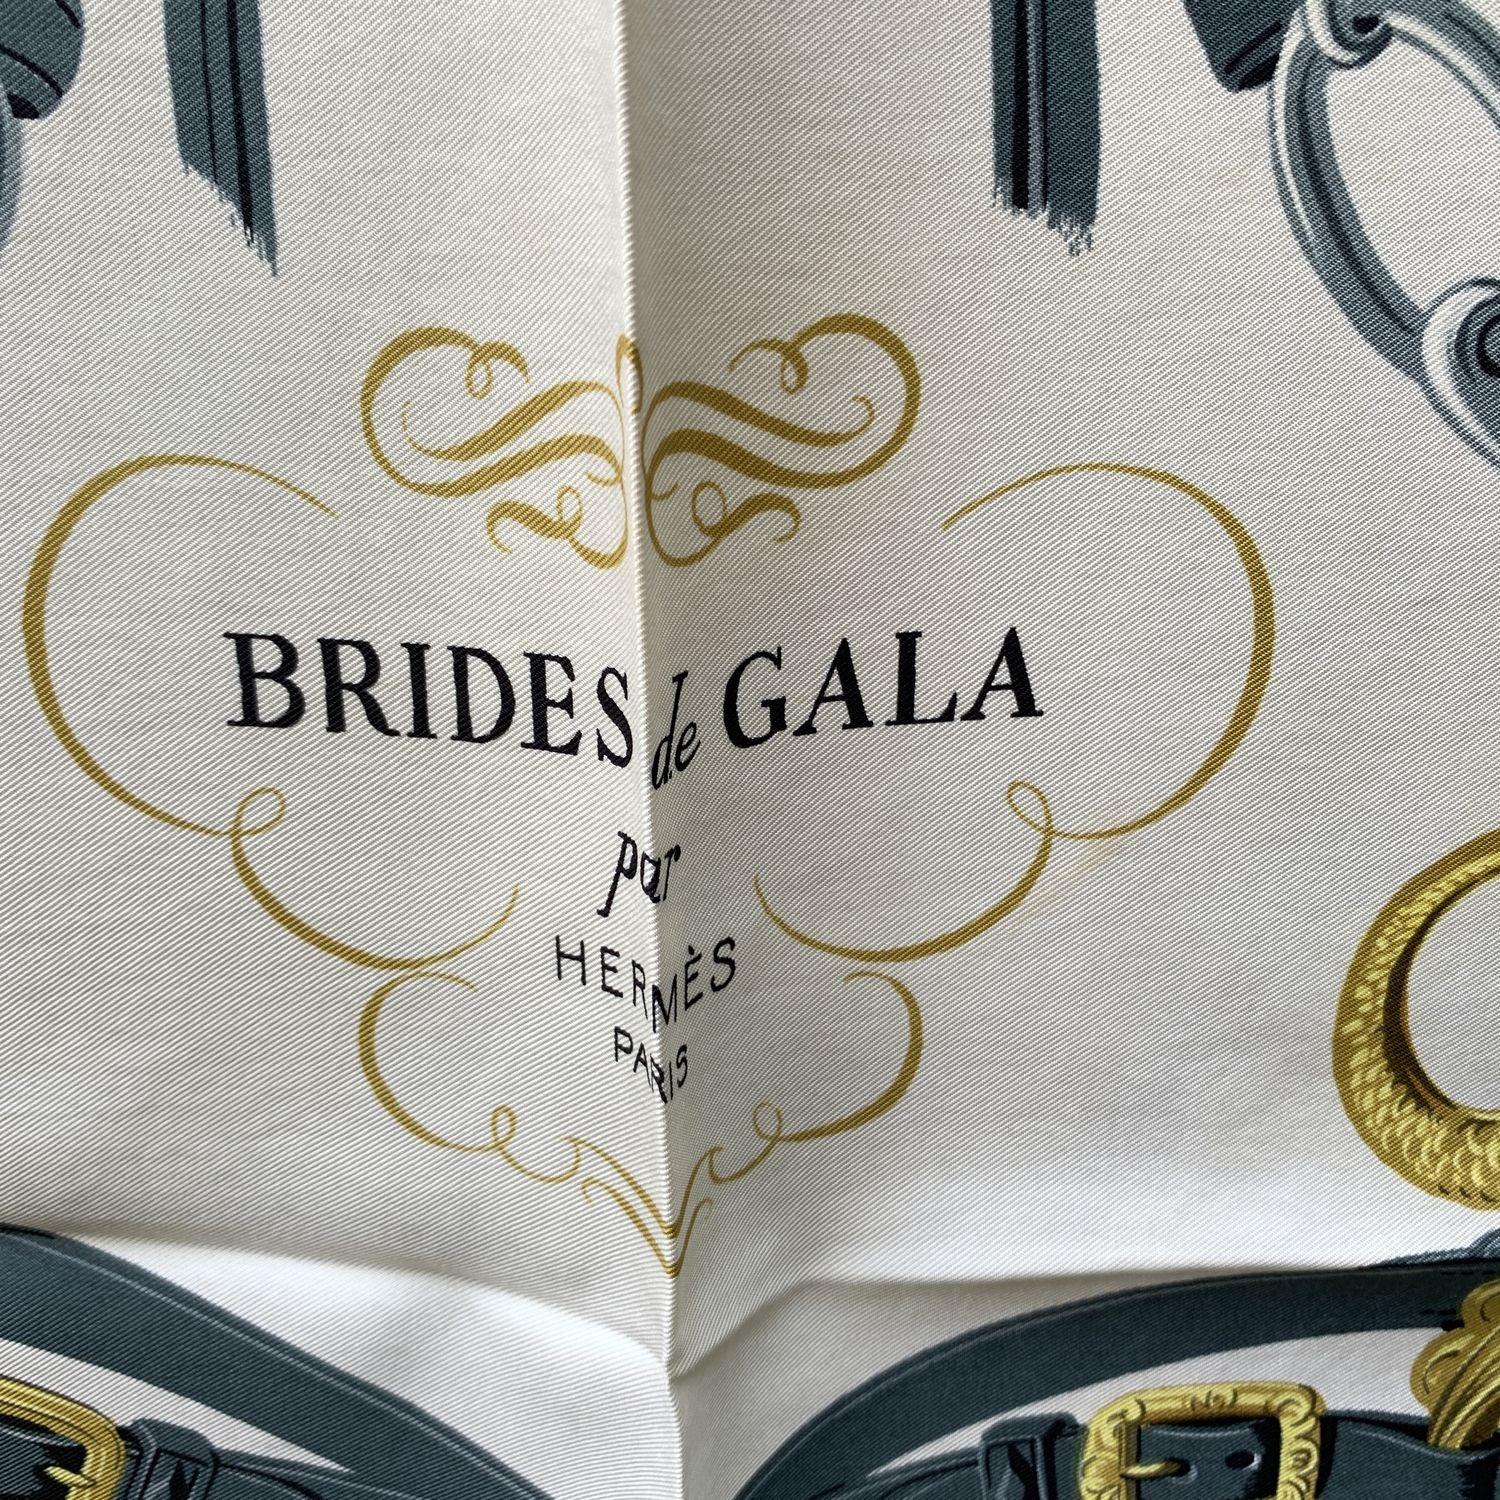 HERMES scarf 'Brides de Gala' by Hugo Grygkar and originally issued in 1957. It is a truly classics of Hermes maison and it is issued constantly. This design depicts two bridles decorated with the emblazoned fastenings that adorned horse-drawn